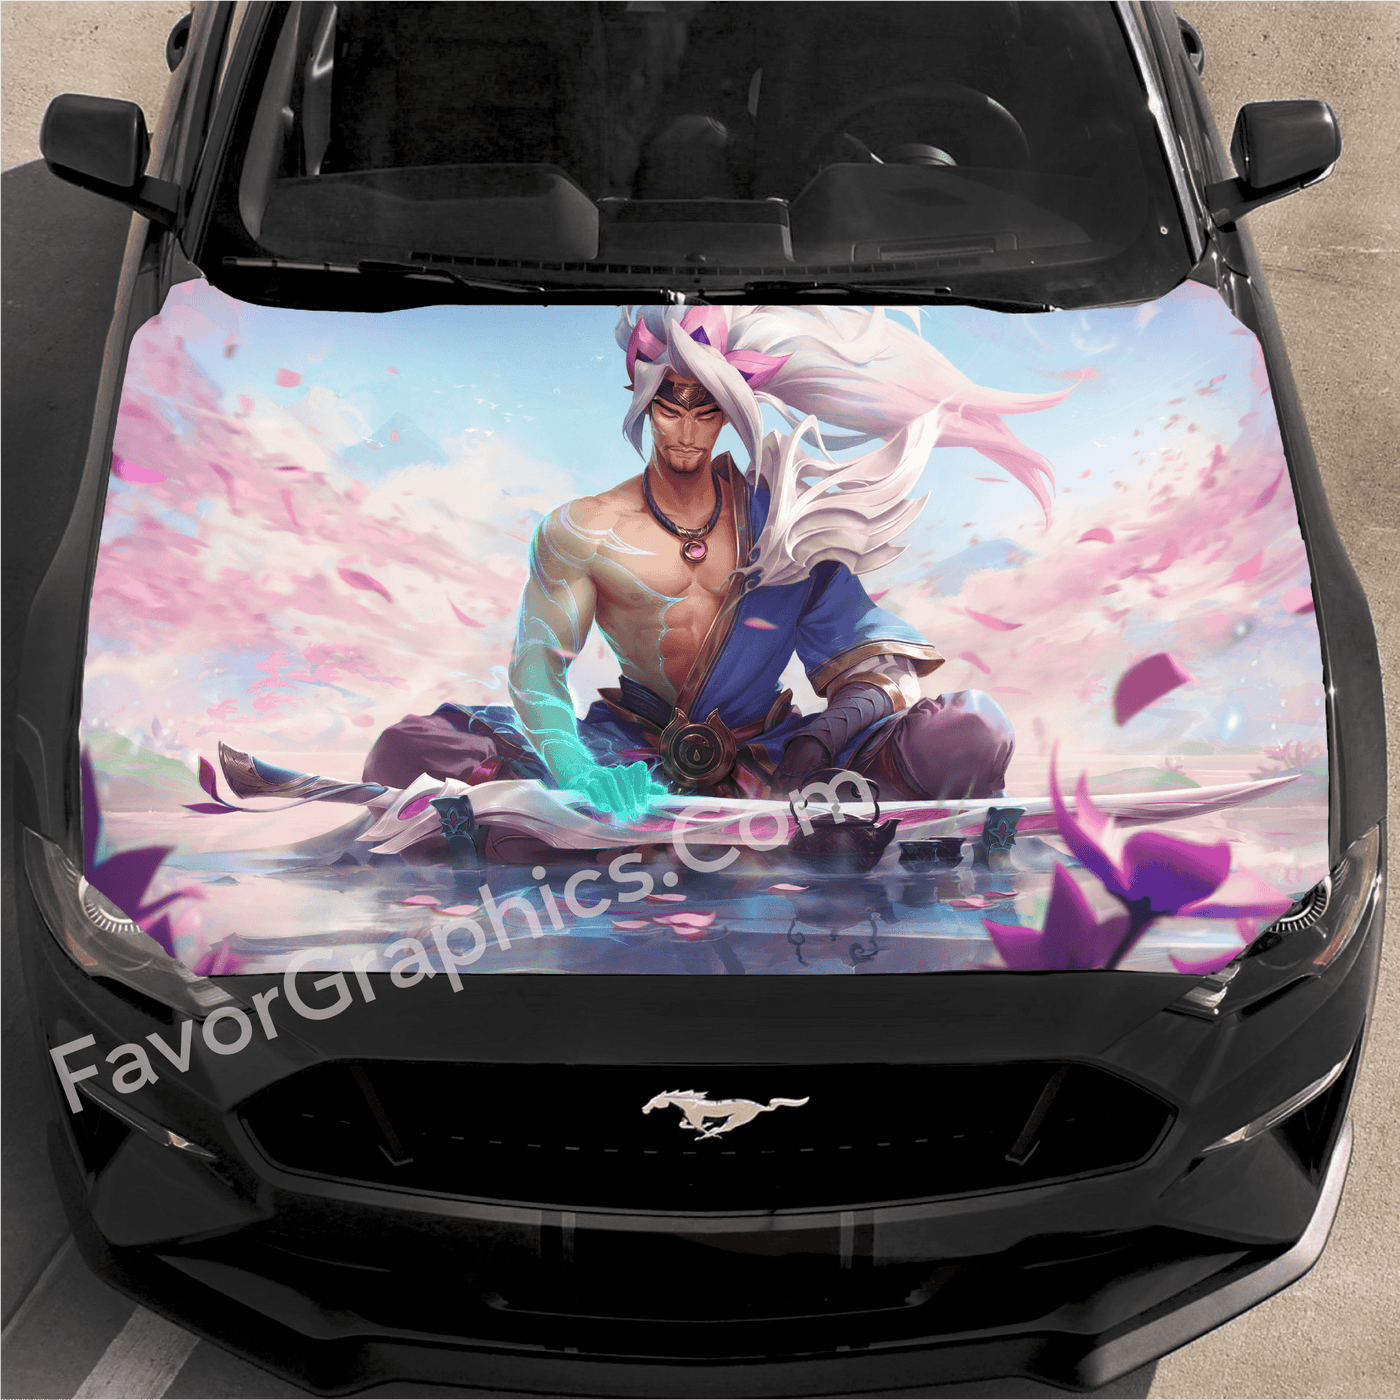 League of Legends Yasuo Car Decal Vinyl Hood Wrap High Quality Graphic